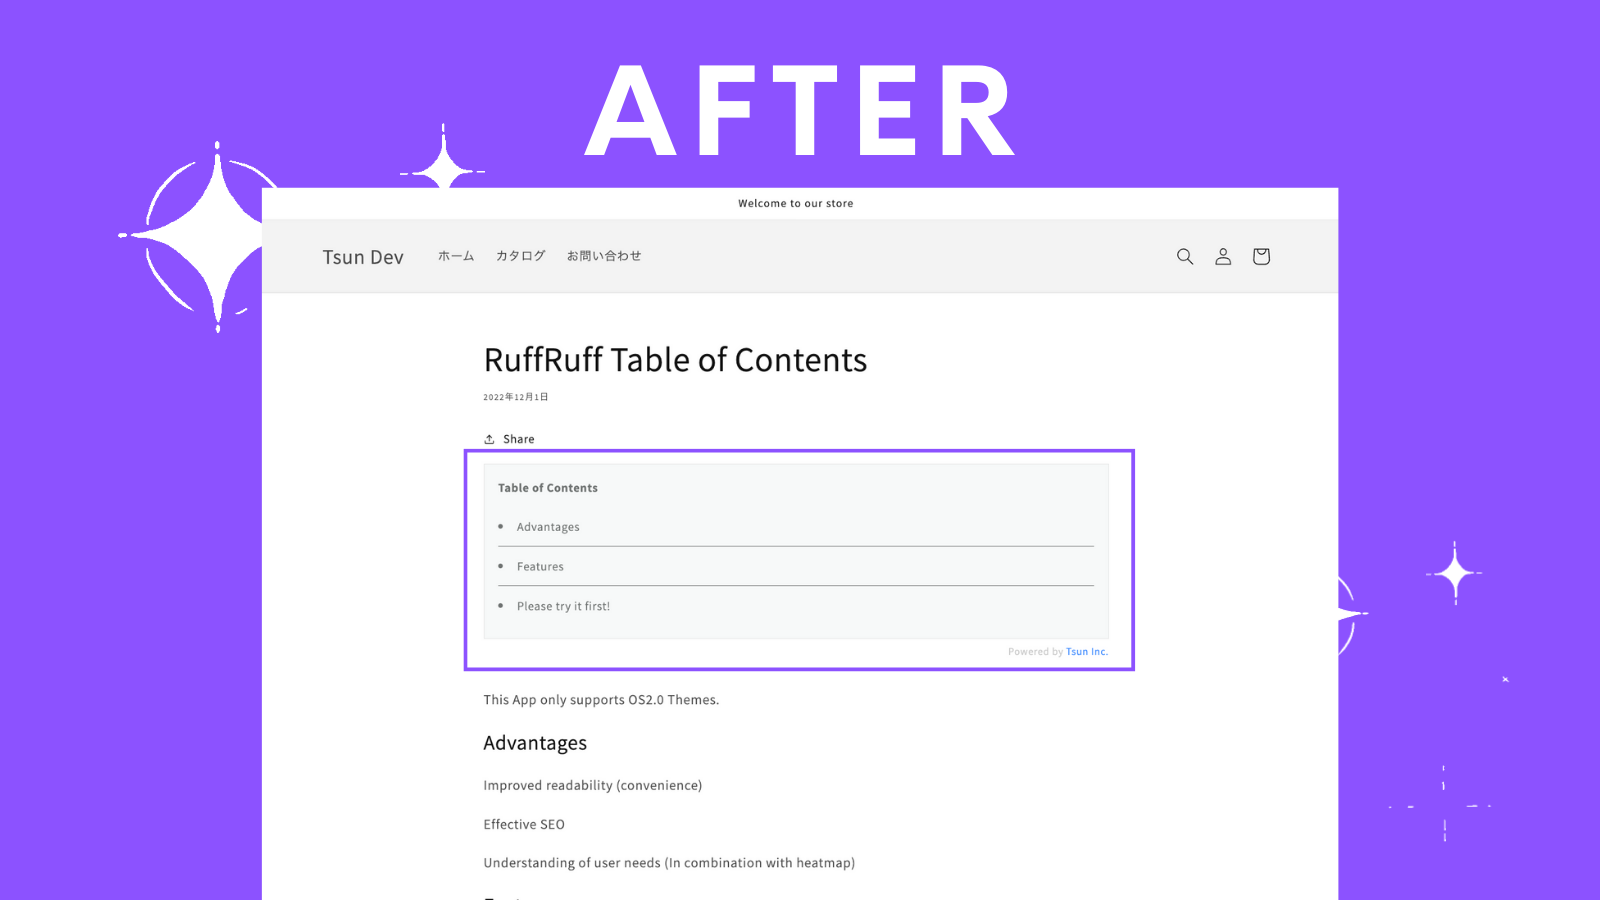 Showing the storefront view of RuffRuff Table of Contents